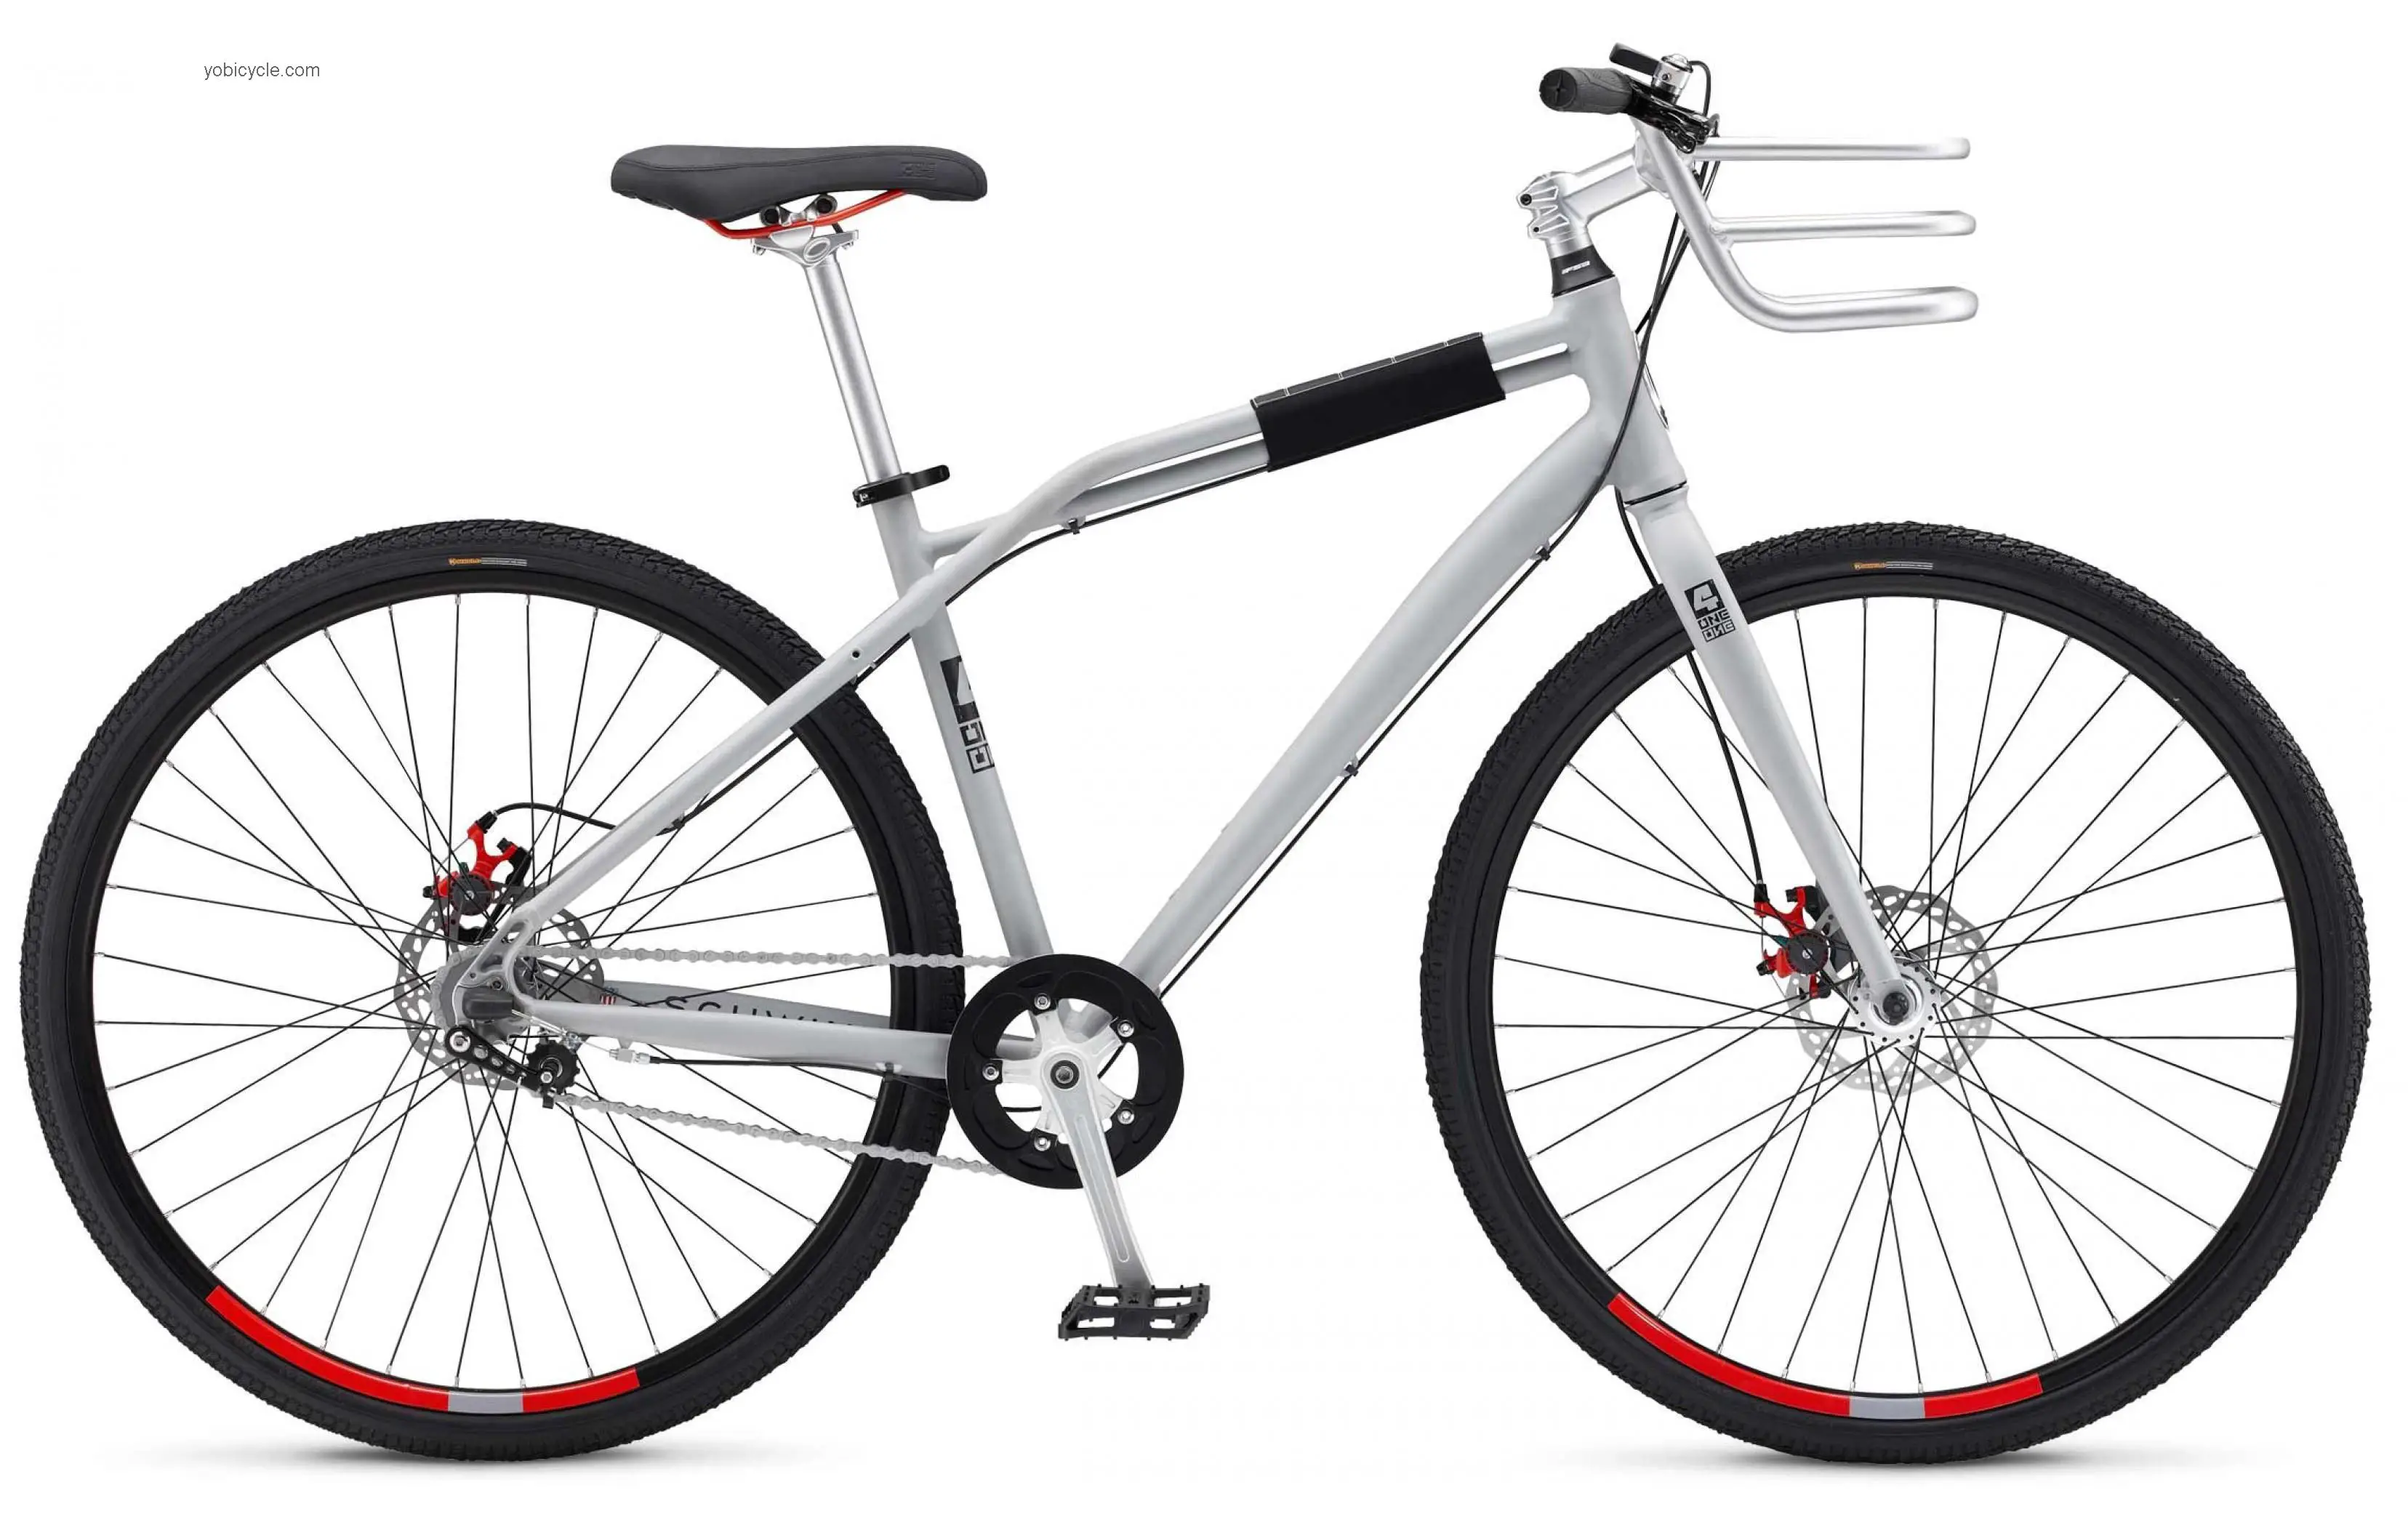 Schwinn 4 One One 1 2013 comparison online with competitors